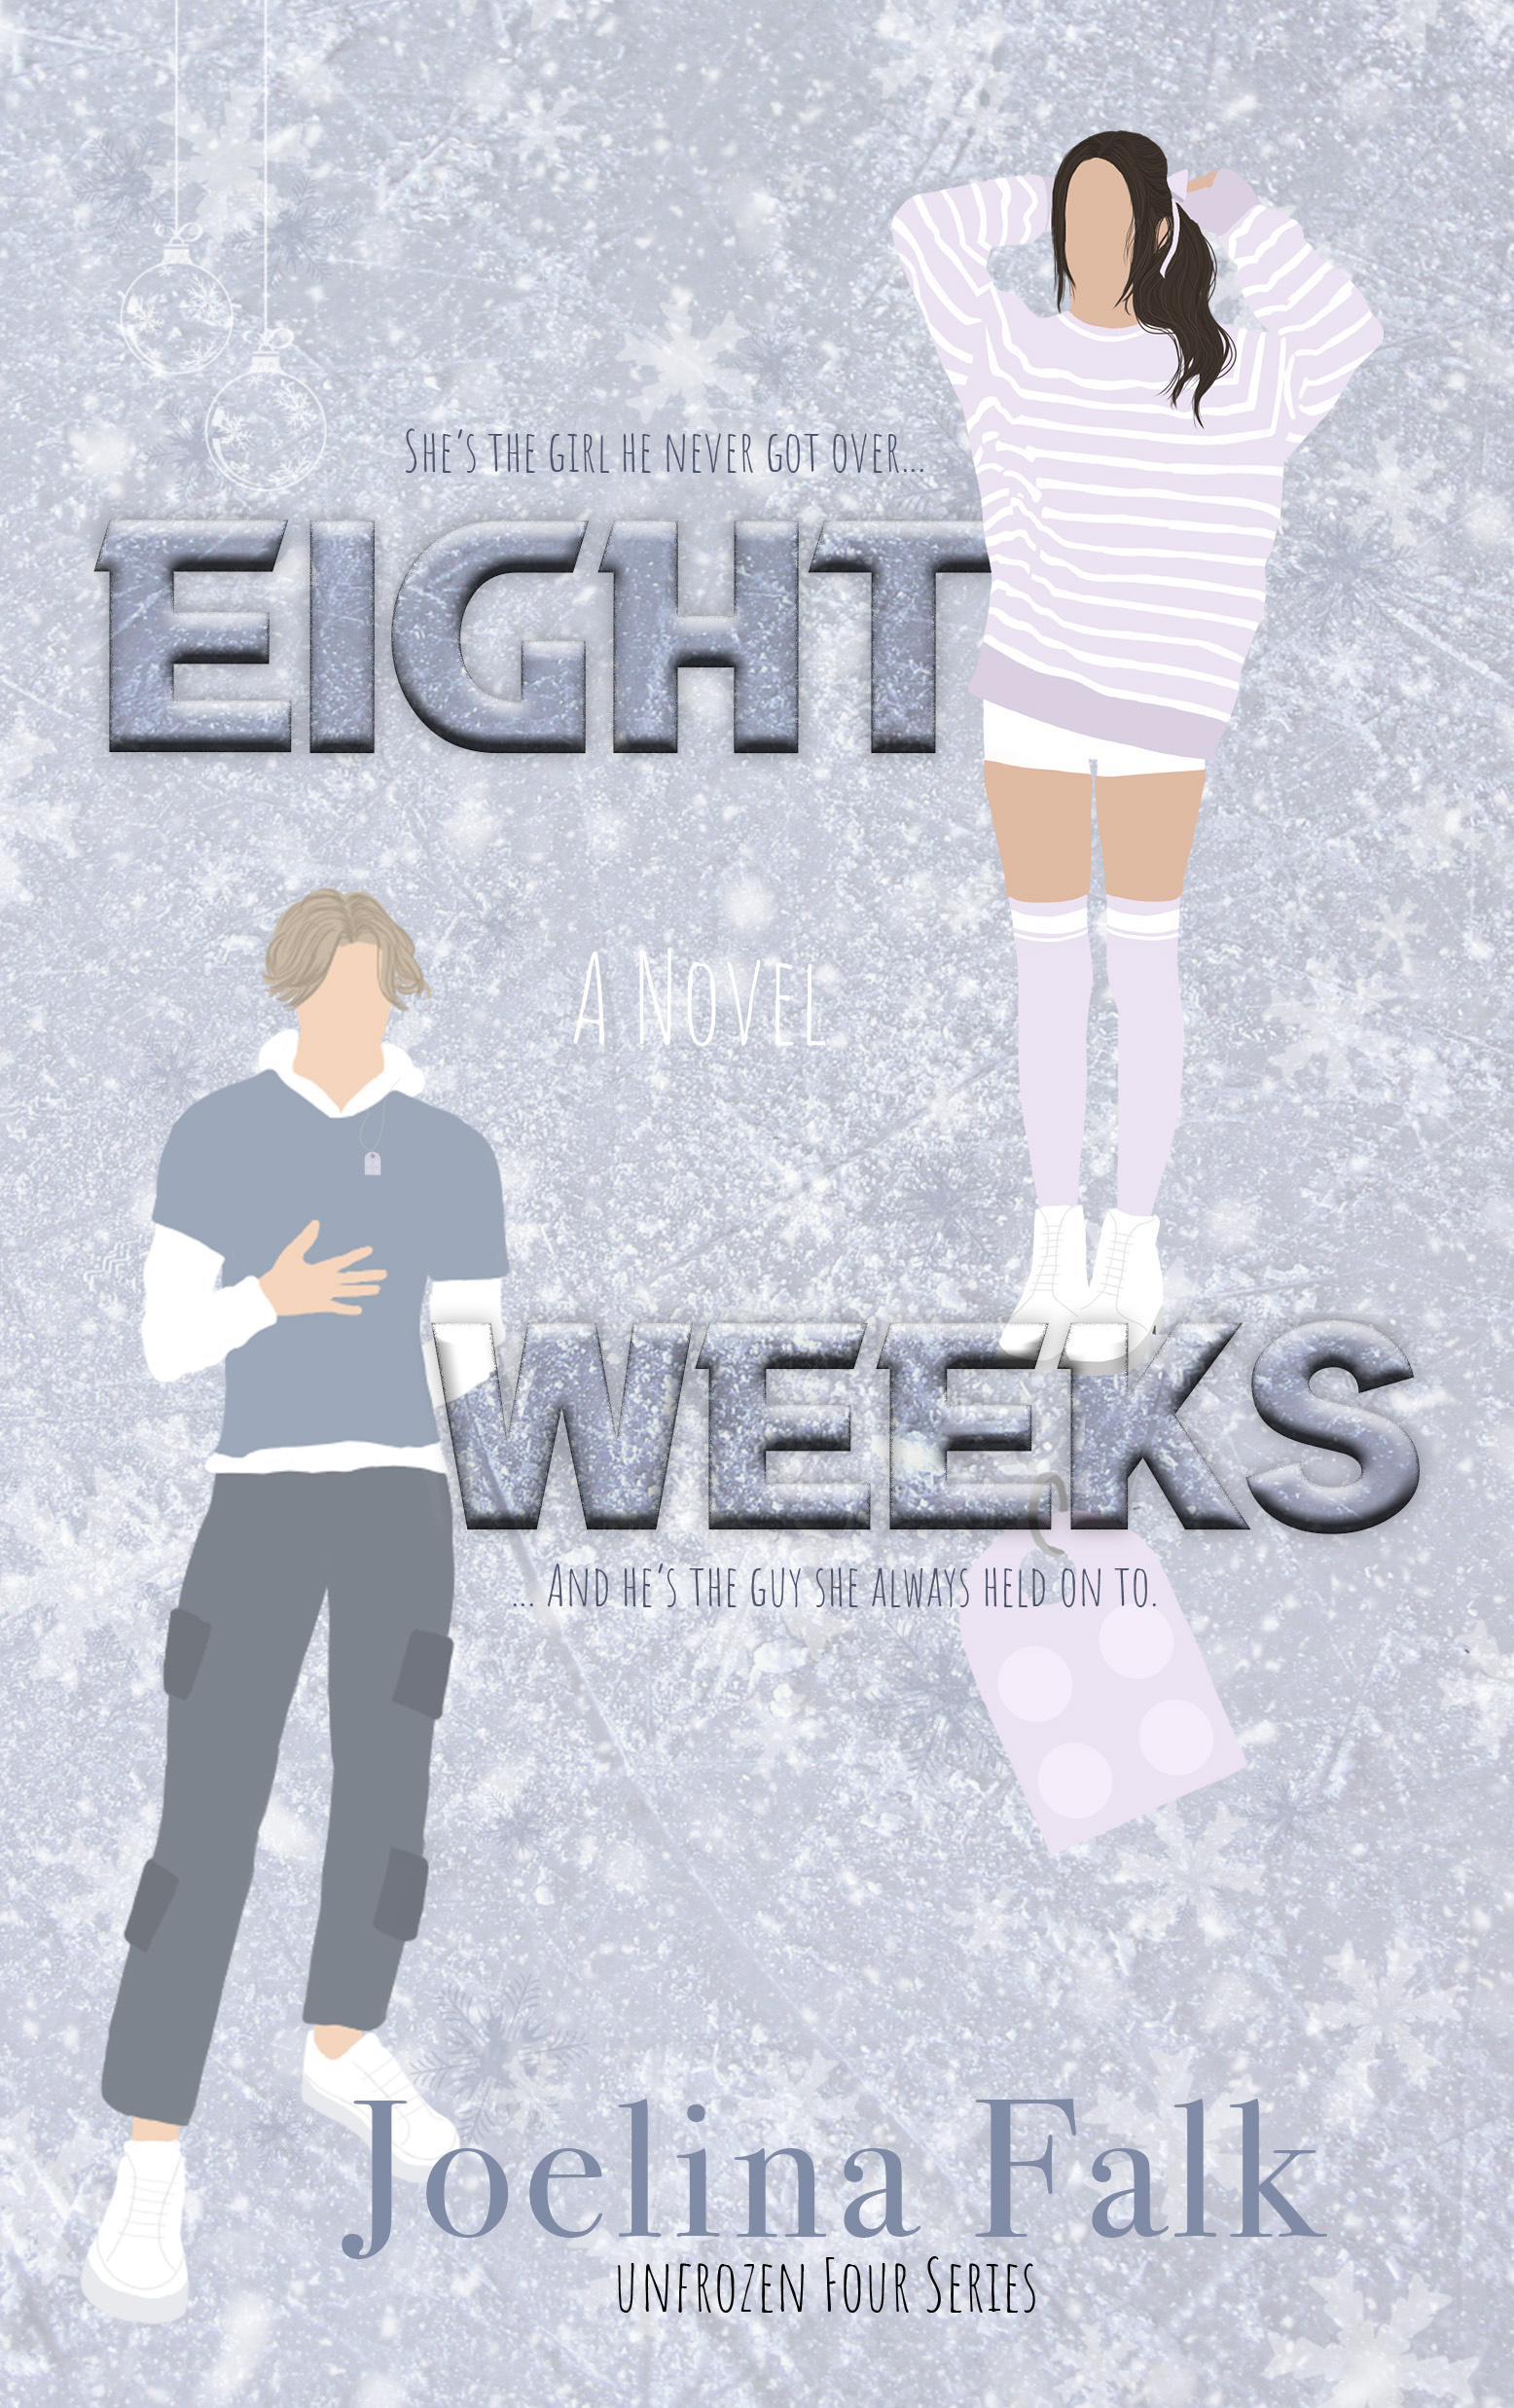 "Book cover of Eight Weeks by Joelina Falk. The illustration features a boy in casual winter clothing and a girl in a purple striped sweater and white skirt against a snowy, icy background with snowflakes and ornaments. The text reads: 'She's the girl he never got over... Eight Weeks ...And he's the guy she always held on to.' Below, it says 'Joelina Falk' and 'Unfrozen Four Series.'"